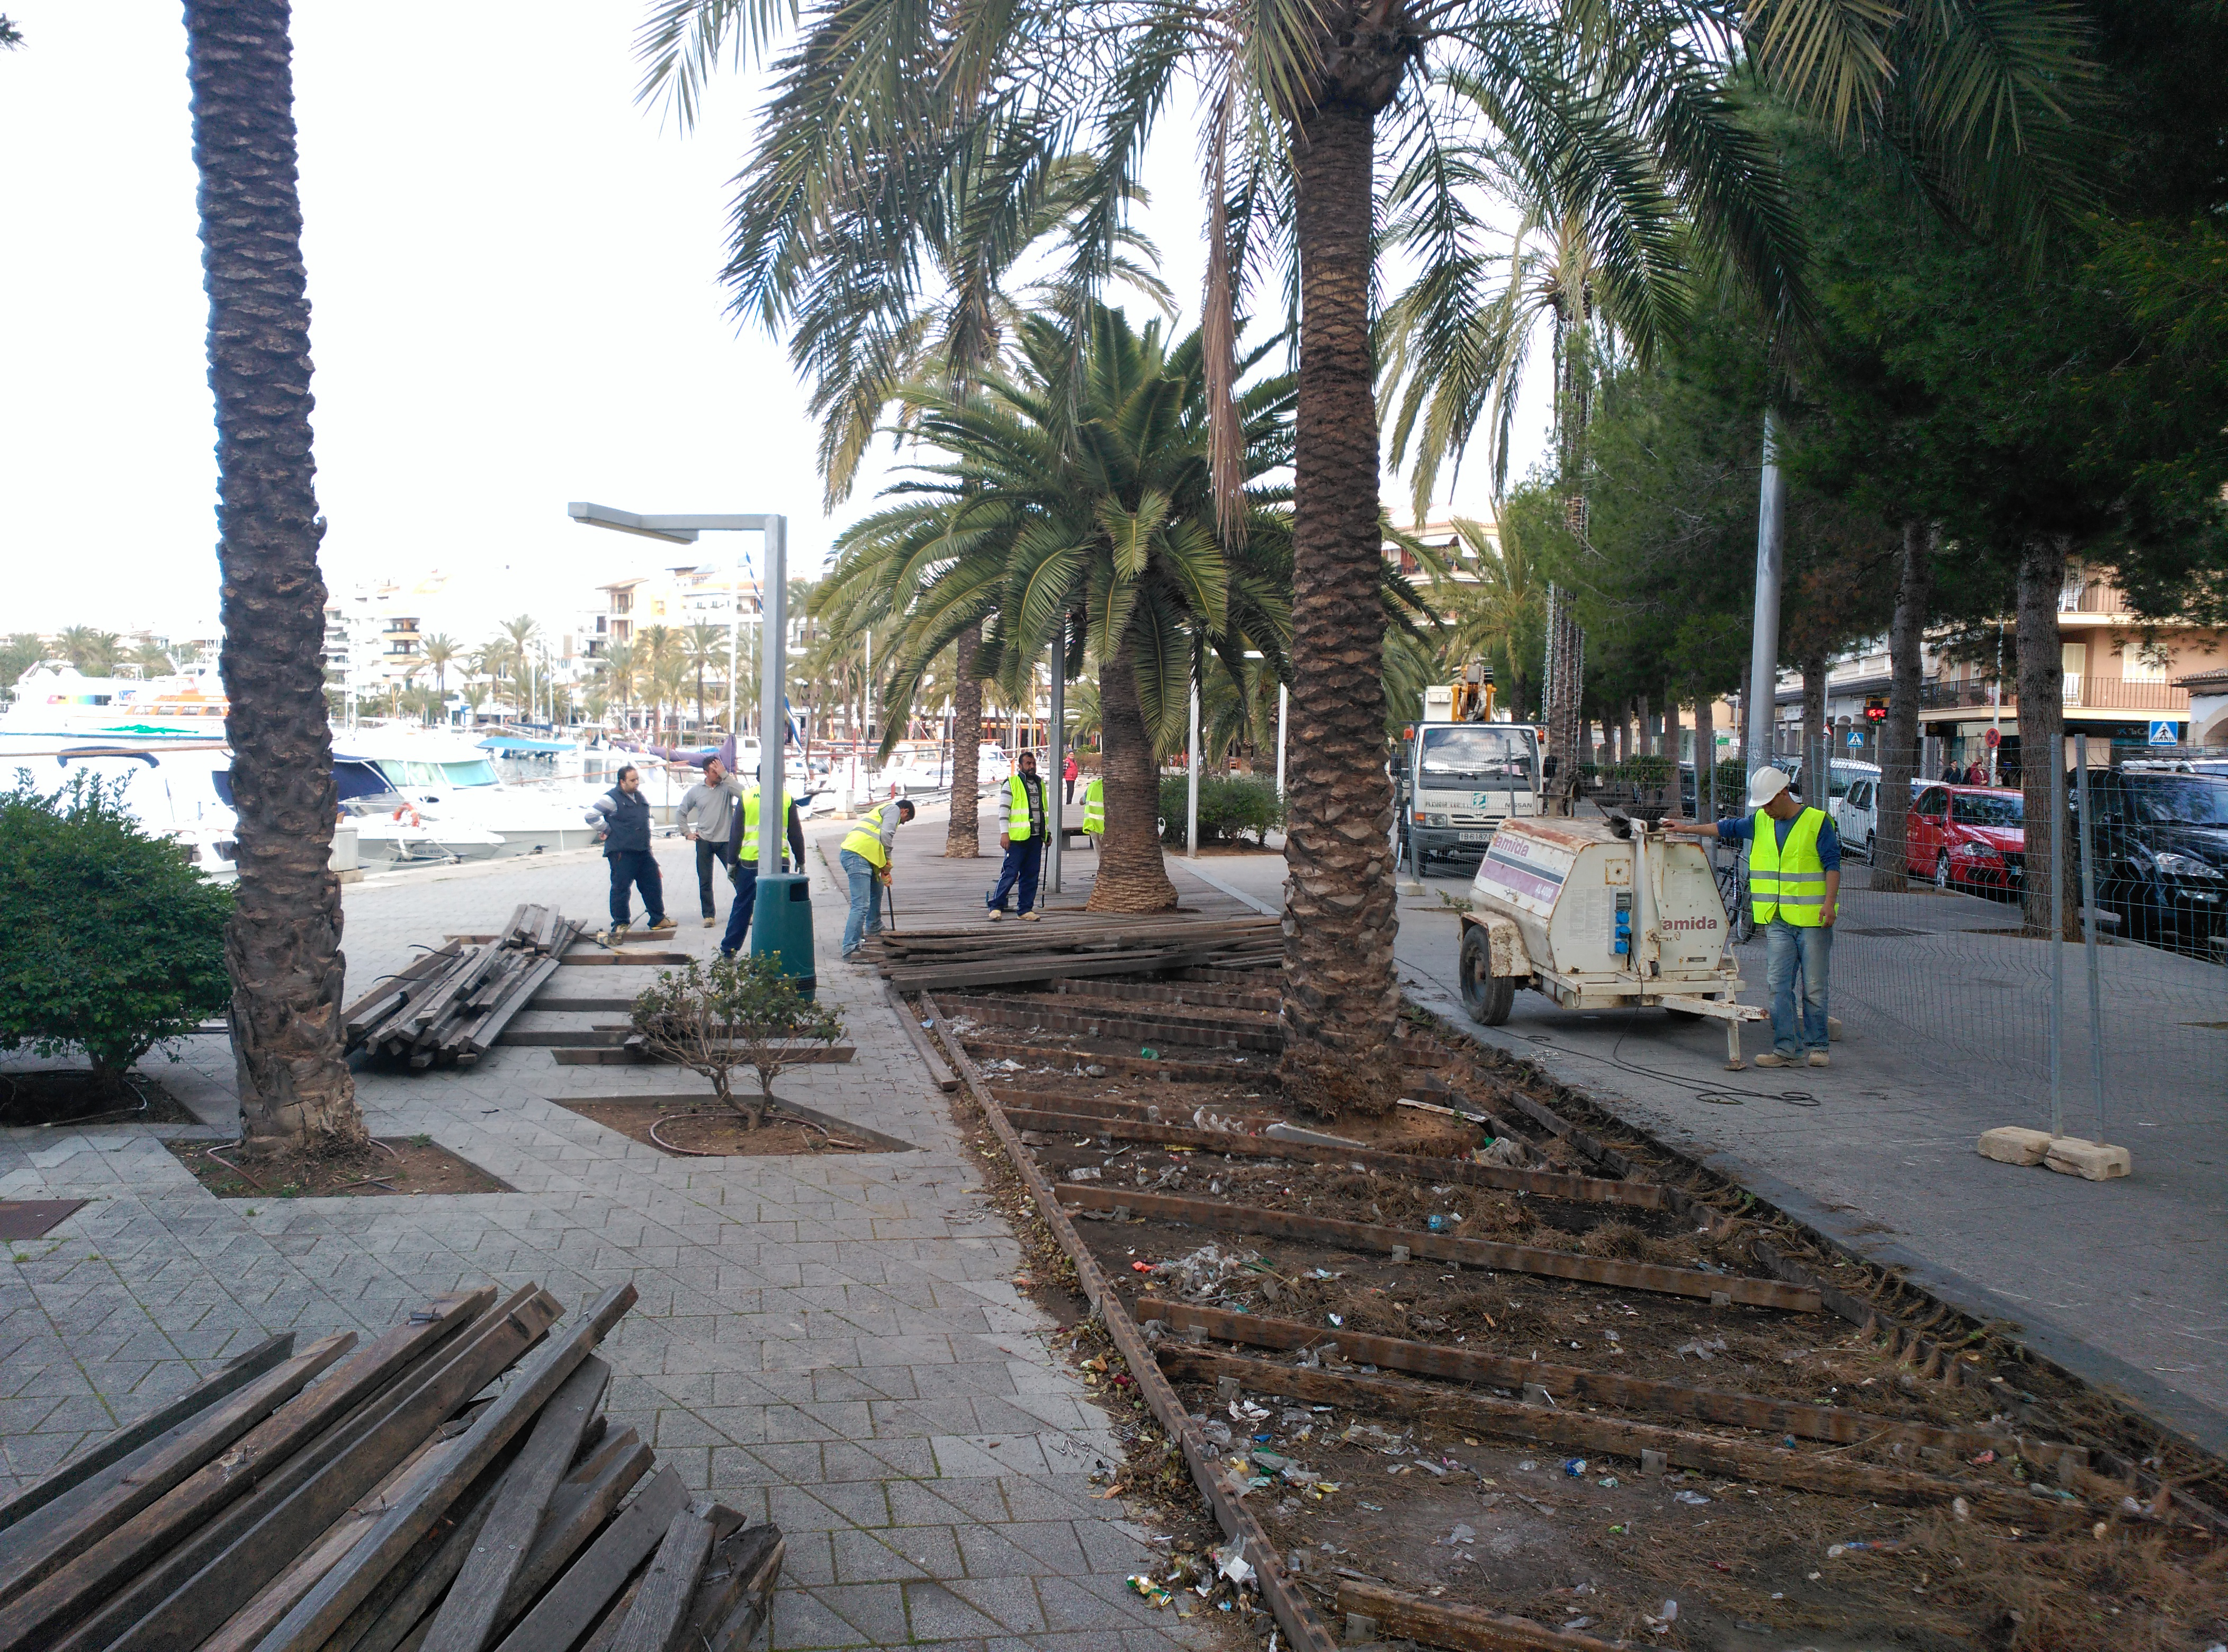 Work is underway on the refurbishment of the seaside promenade at Alcudia’s Port.